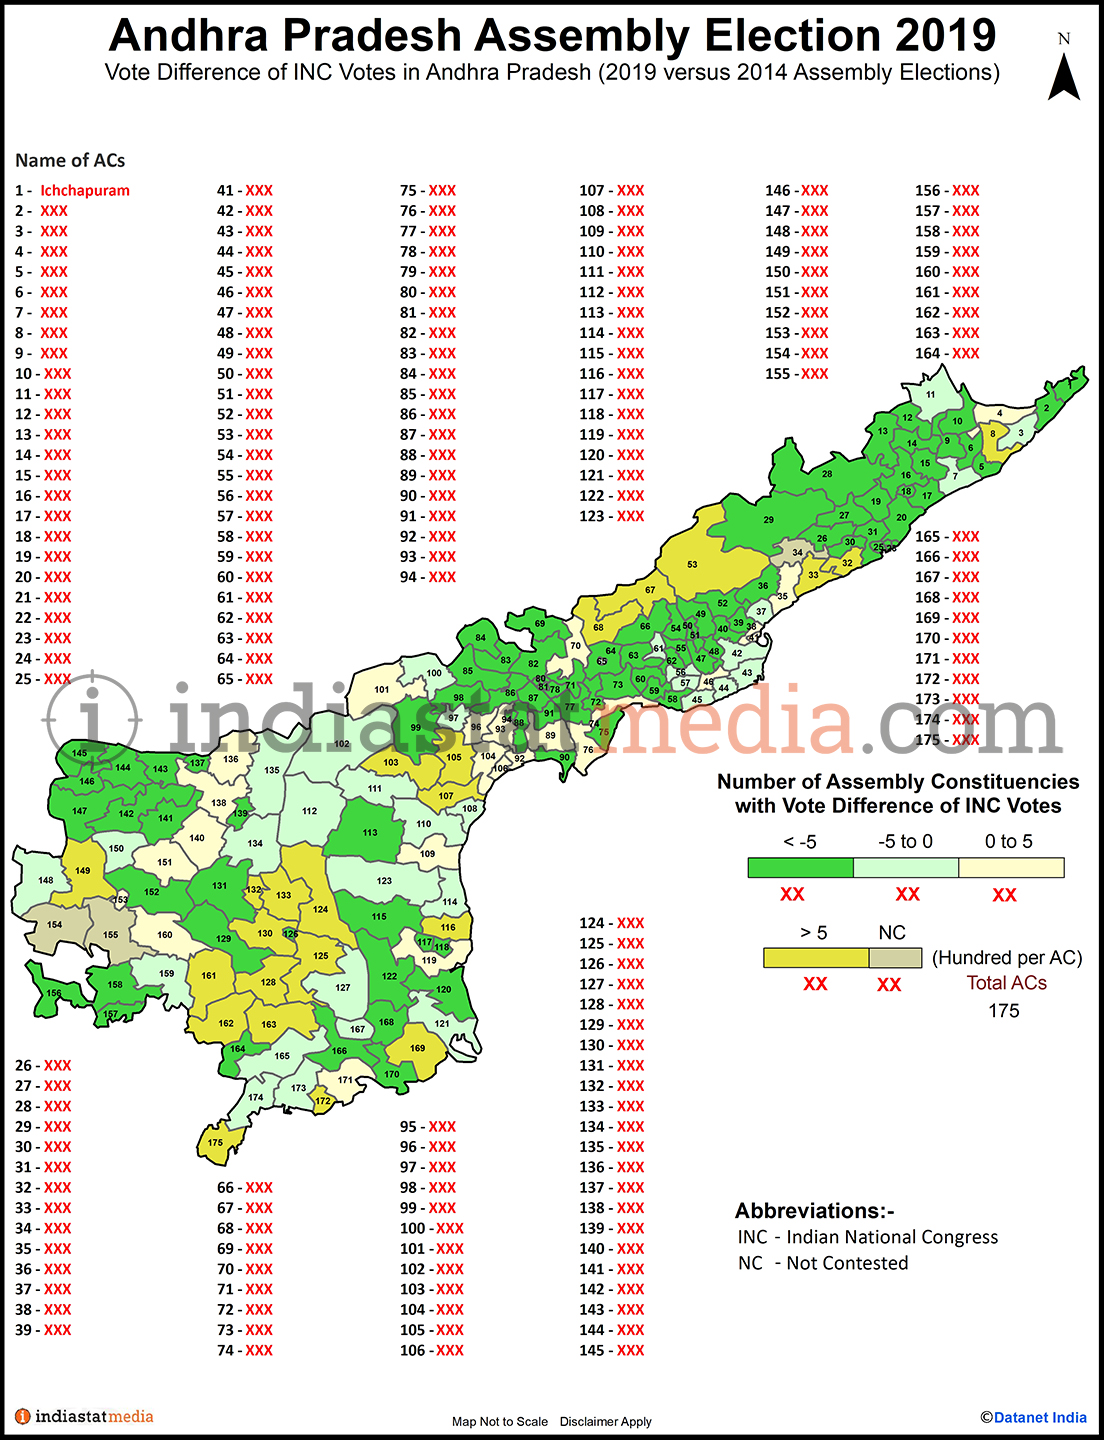 Assembly Constituencies with Vote Difference of INC Votes in Andhra Pradesh (Assembly Elections - 2014 & 2019)